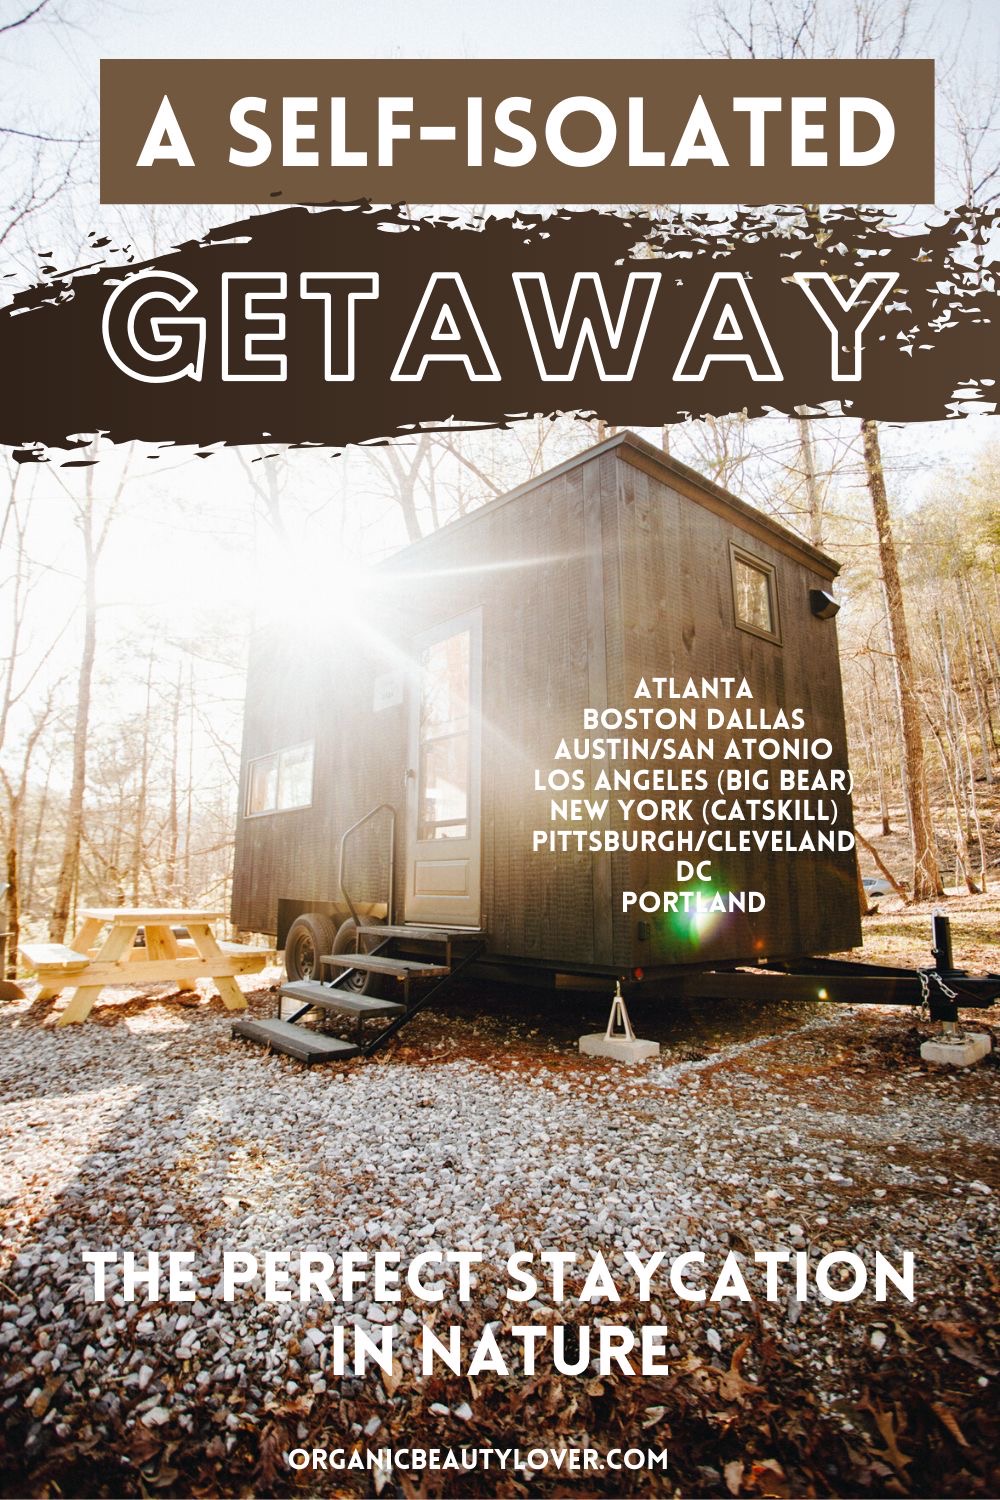 Getaway Cabin Review: A TINY CABIN RENTAL IN NATURE